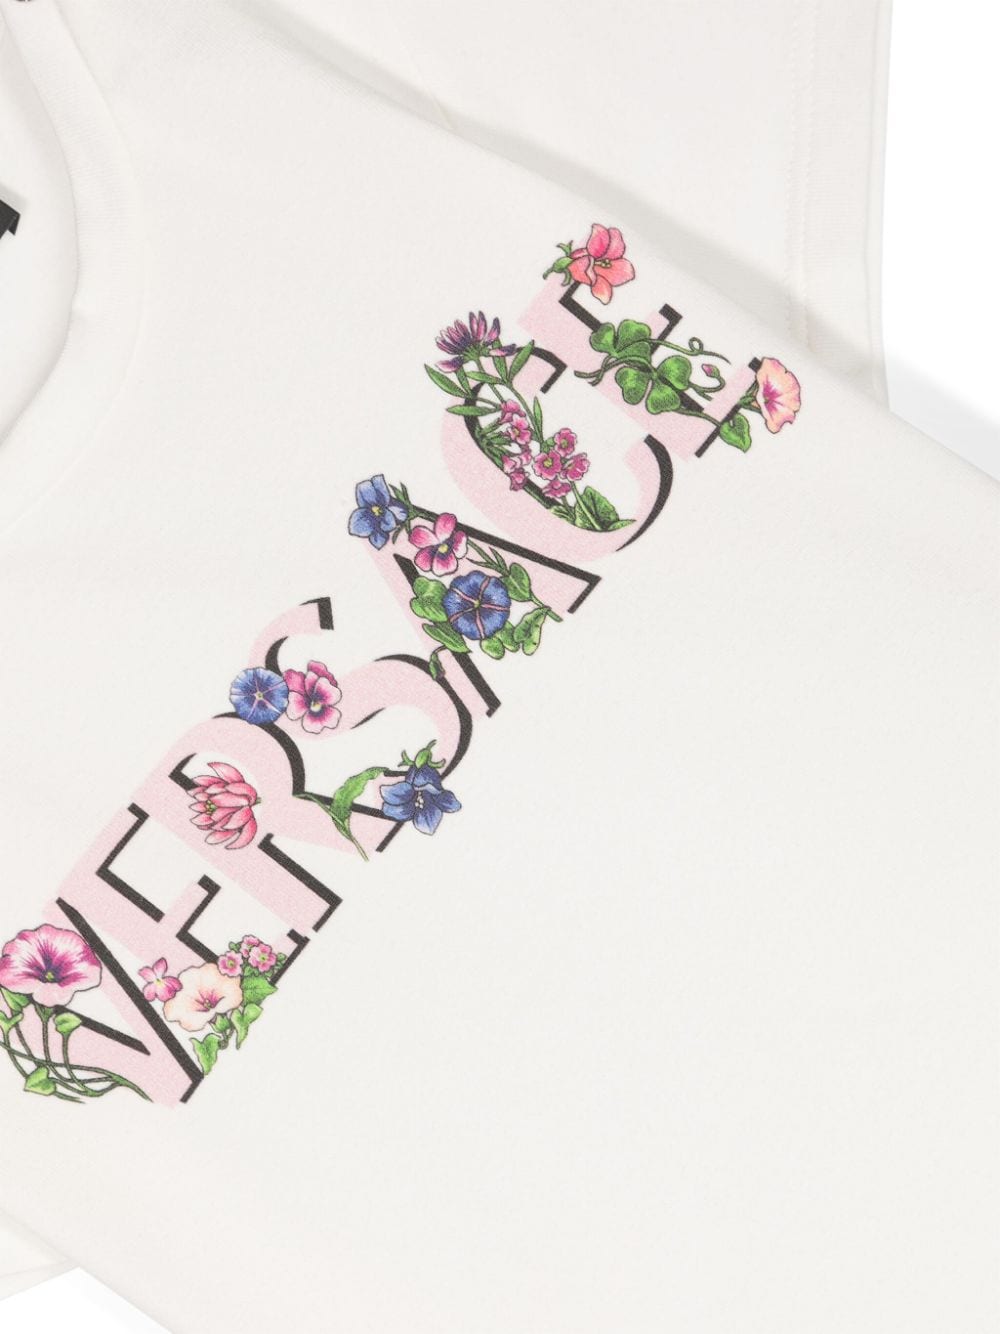 T-shirt with floral logo